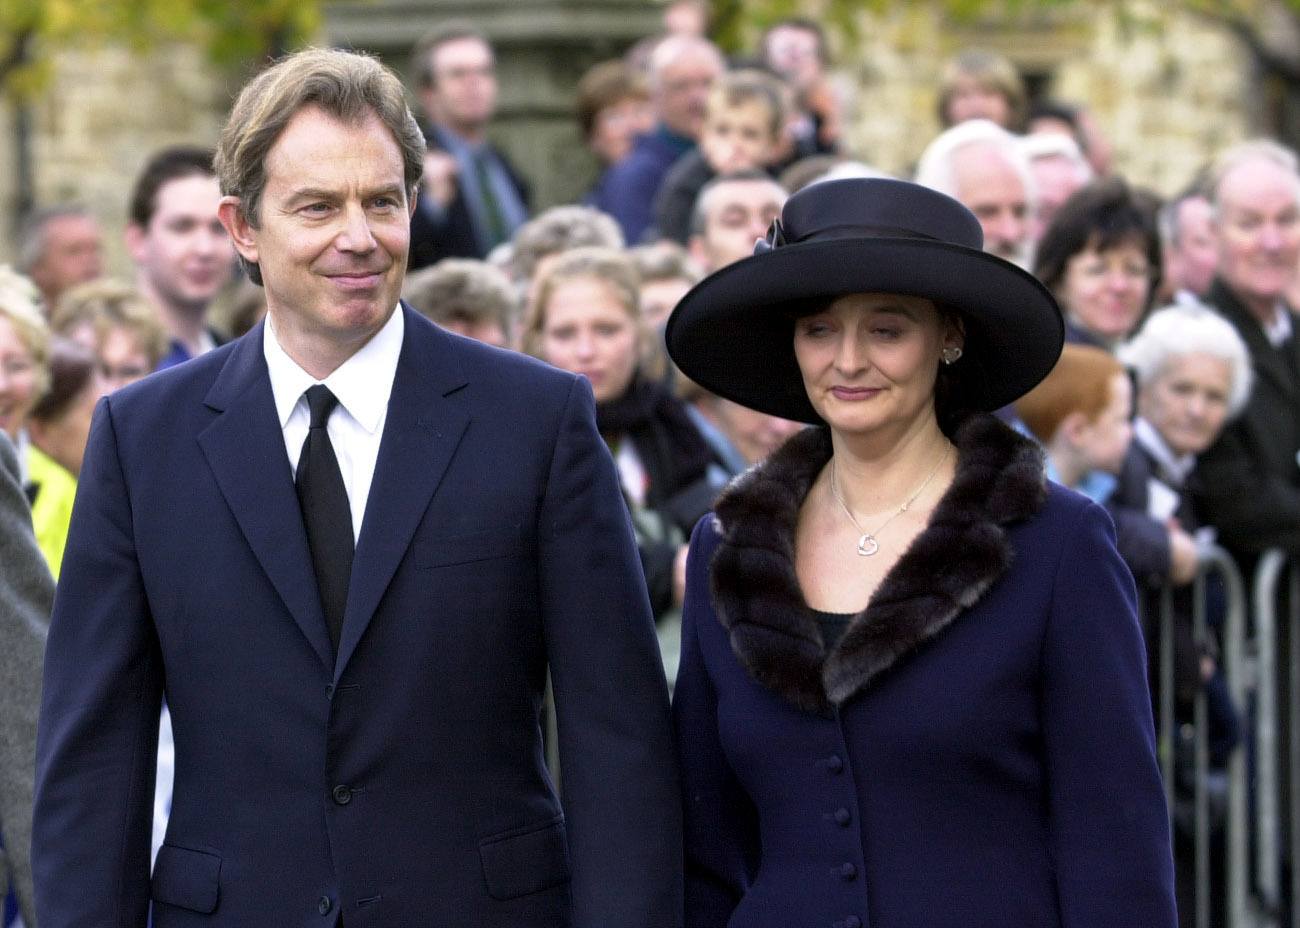 Tony and Cherie Blair were among the attendees at Donald Dewar’s funeral (Ben Curtis/PA).